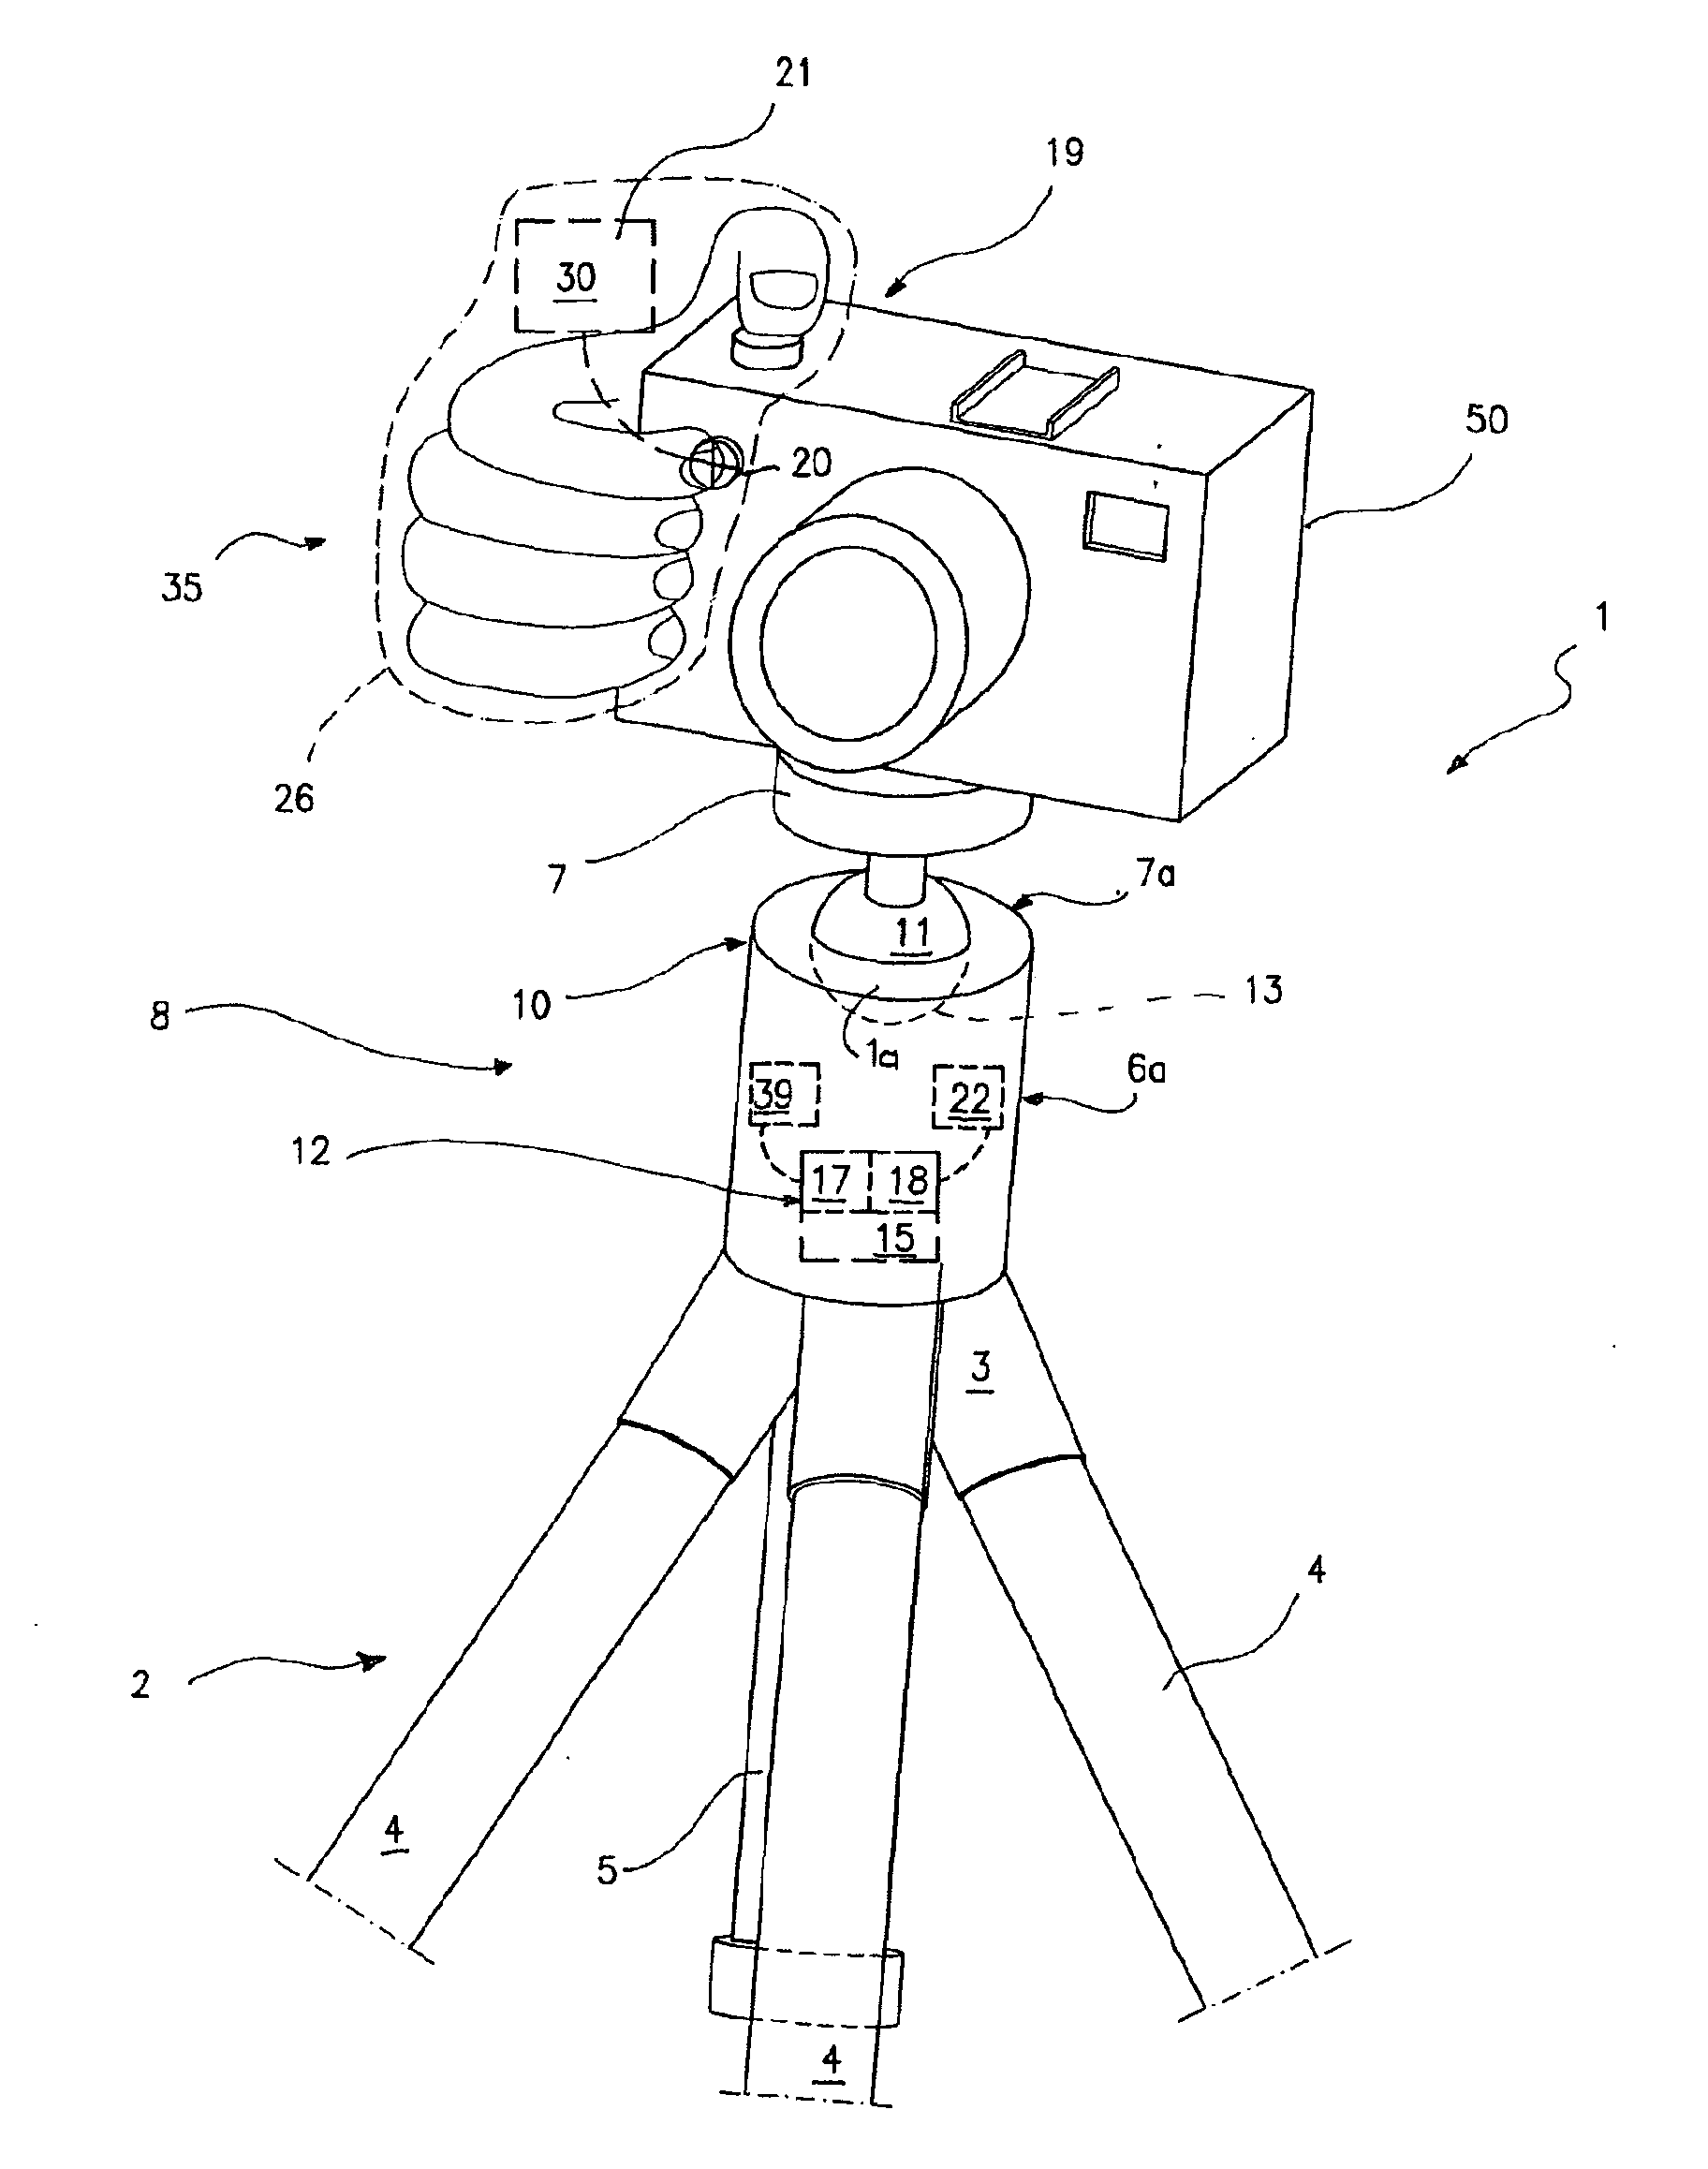 System for the Remote Control of Setting Up a Supporting Head for Optical and/or Photo-Cinematographic Equipment